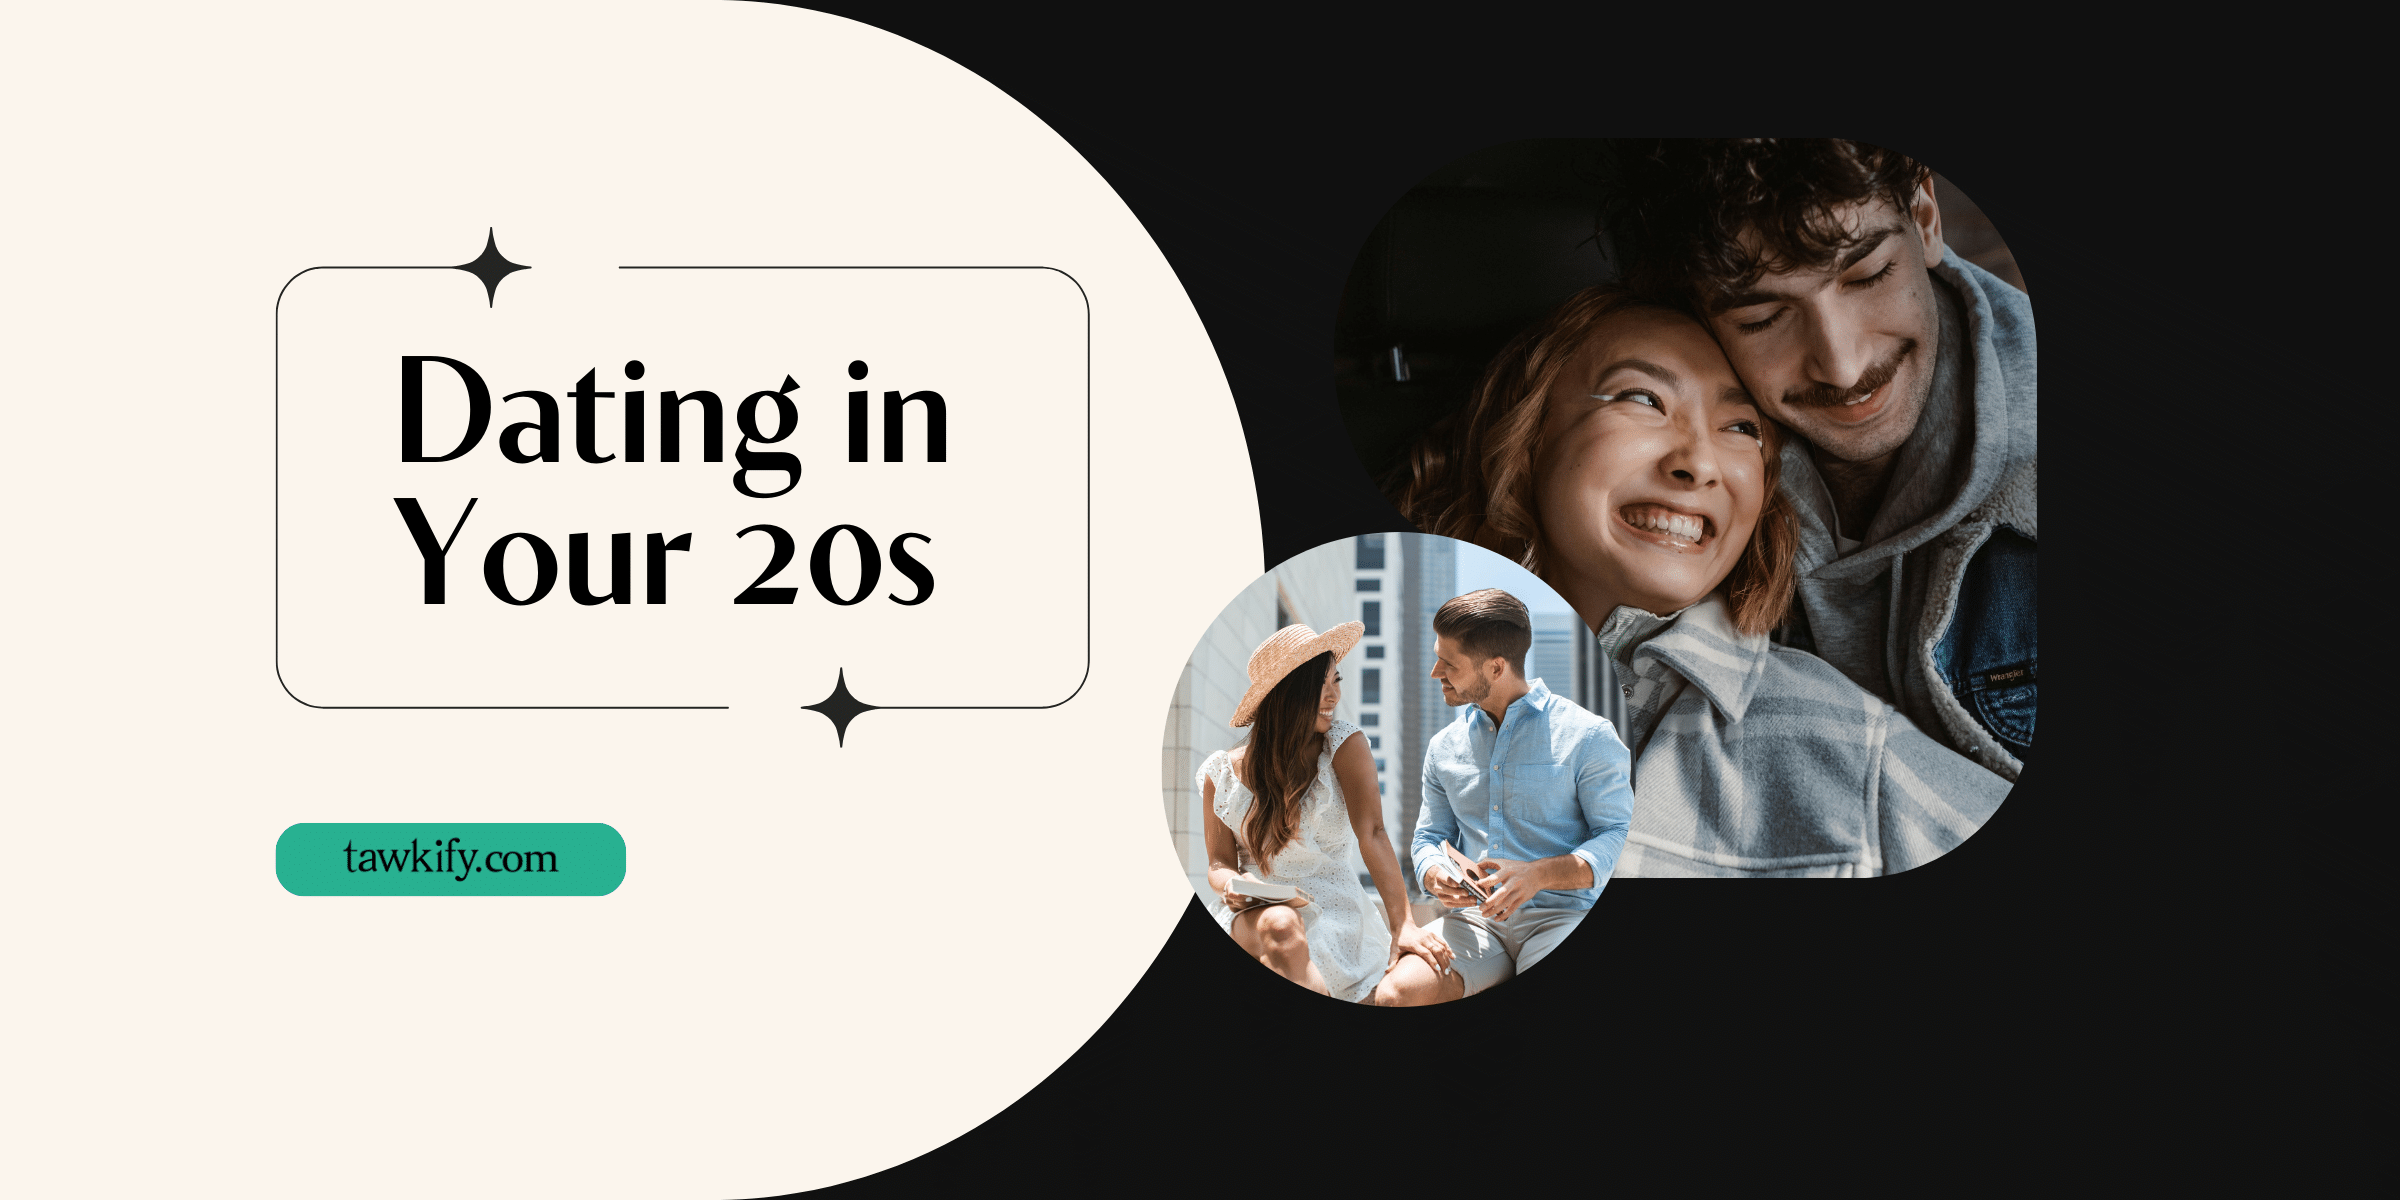 Are you in your 20s and looking to find a partner? Then check out our guide with all the best advice for dating in your 20s.